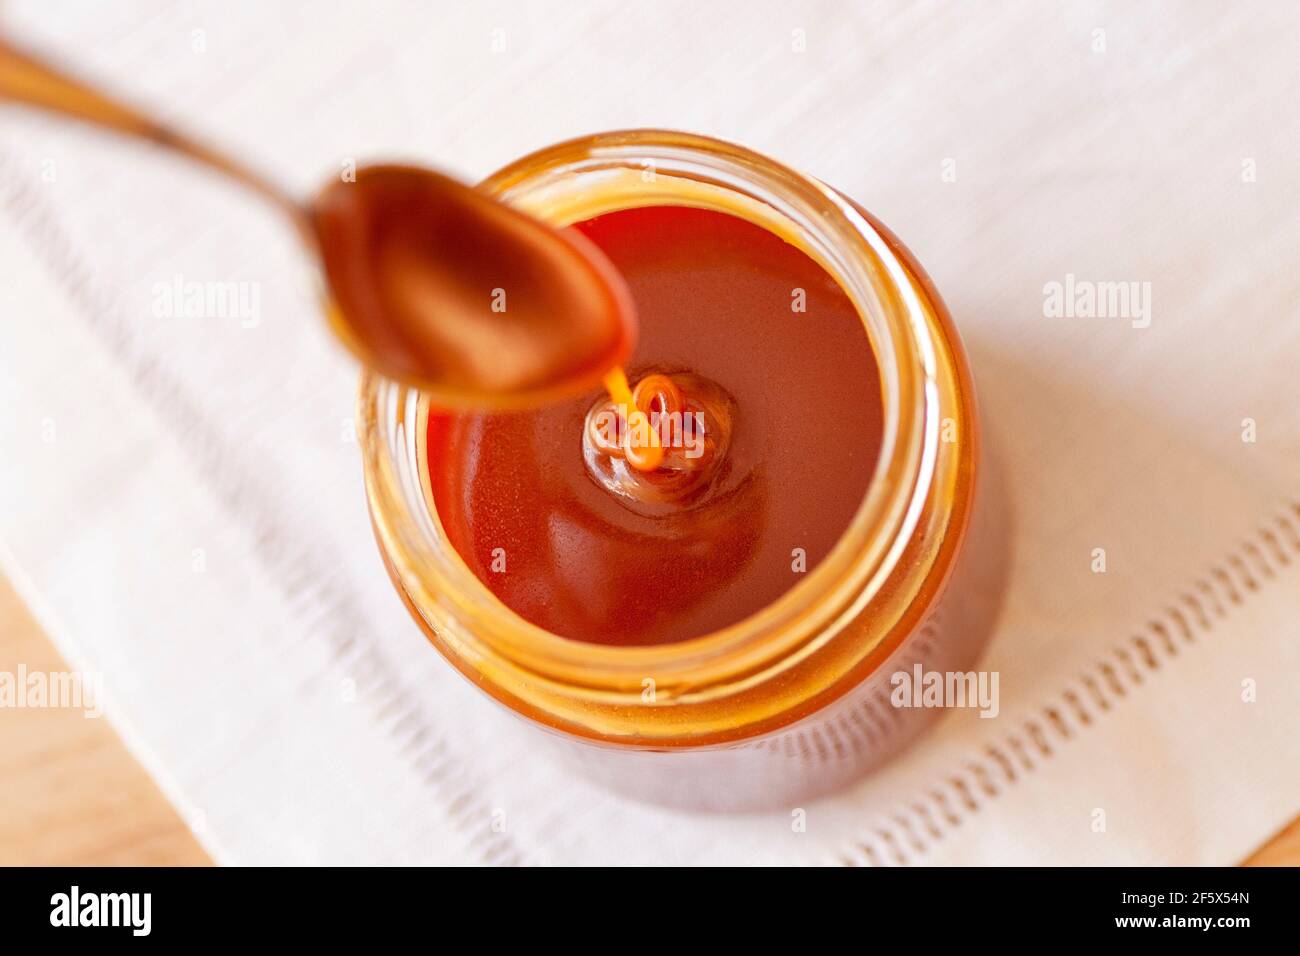 Jar of delicious homemade caramel with a drop falling from a spoon Stock Photo